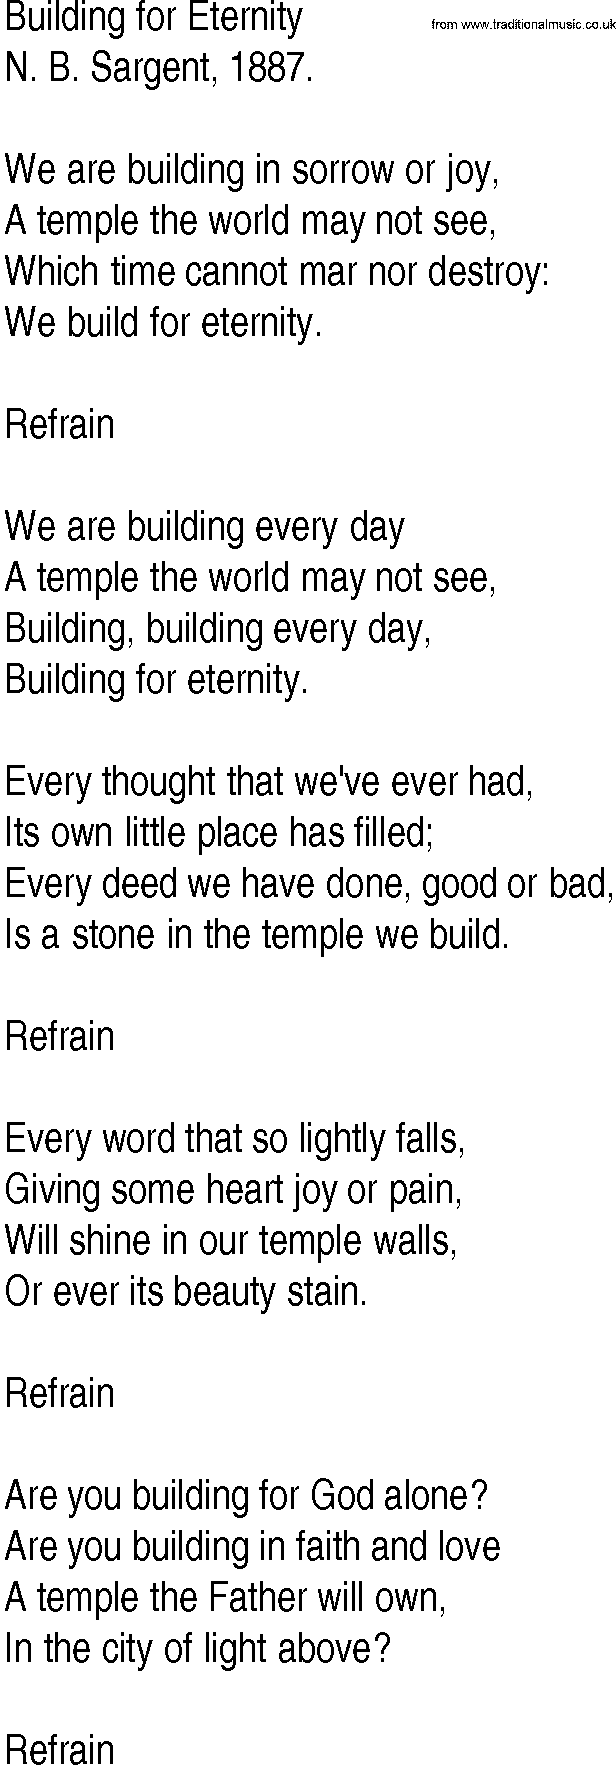 Hymn and Gospel Song: Building for Eternity by N B Sargent lyrics